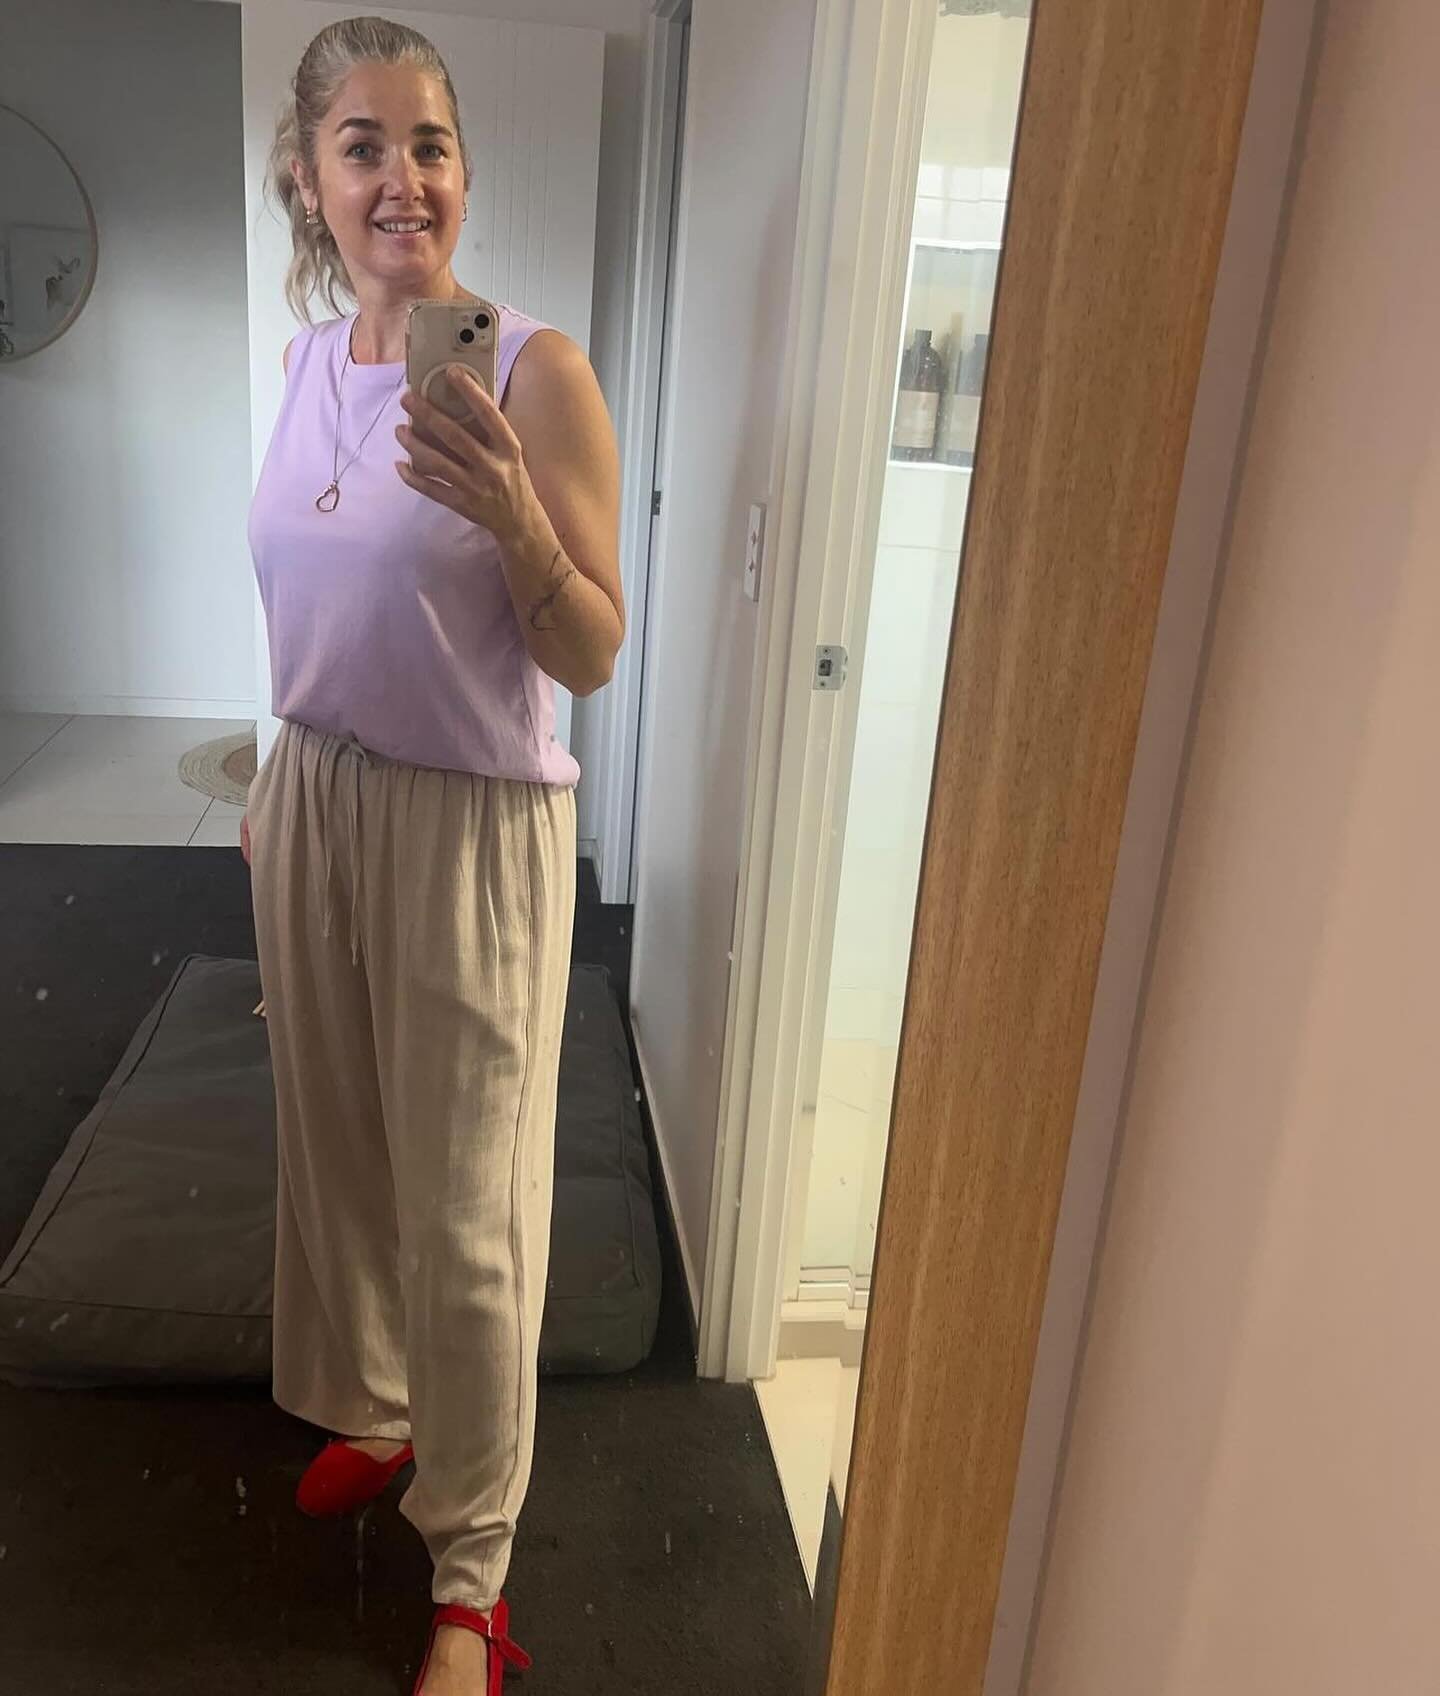 Colour on colour on colour. So gorgeous is our @rosee_wardrobe 

#thebosseffect #styleatanyage #bossbabetribe #bossinyourwardrobe #bossofyourwardrobe #nattucker #makeitlookeasy #realstreetstyle #rewear #shopyourwardrobe #itsnattucker #wearyourwardrob